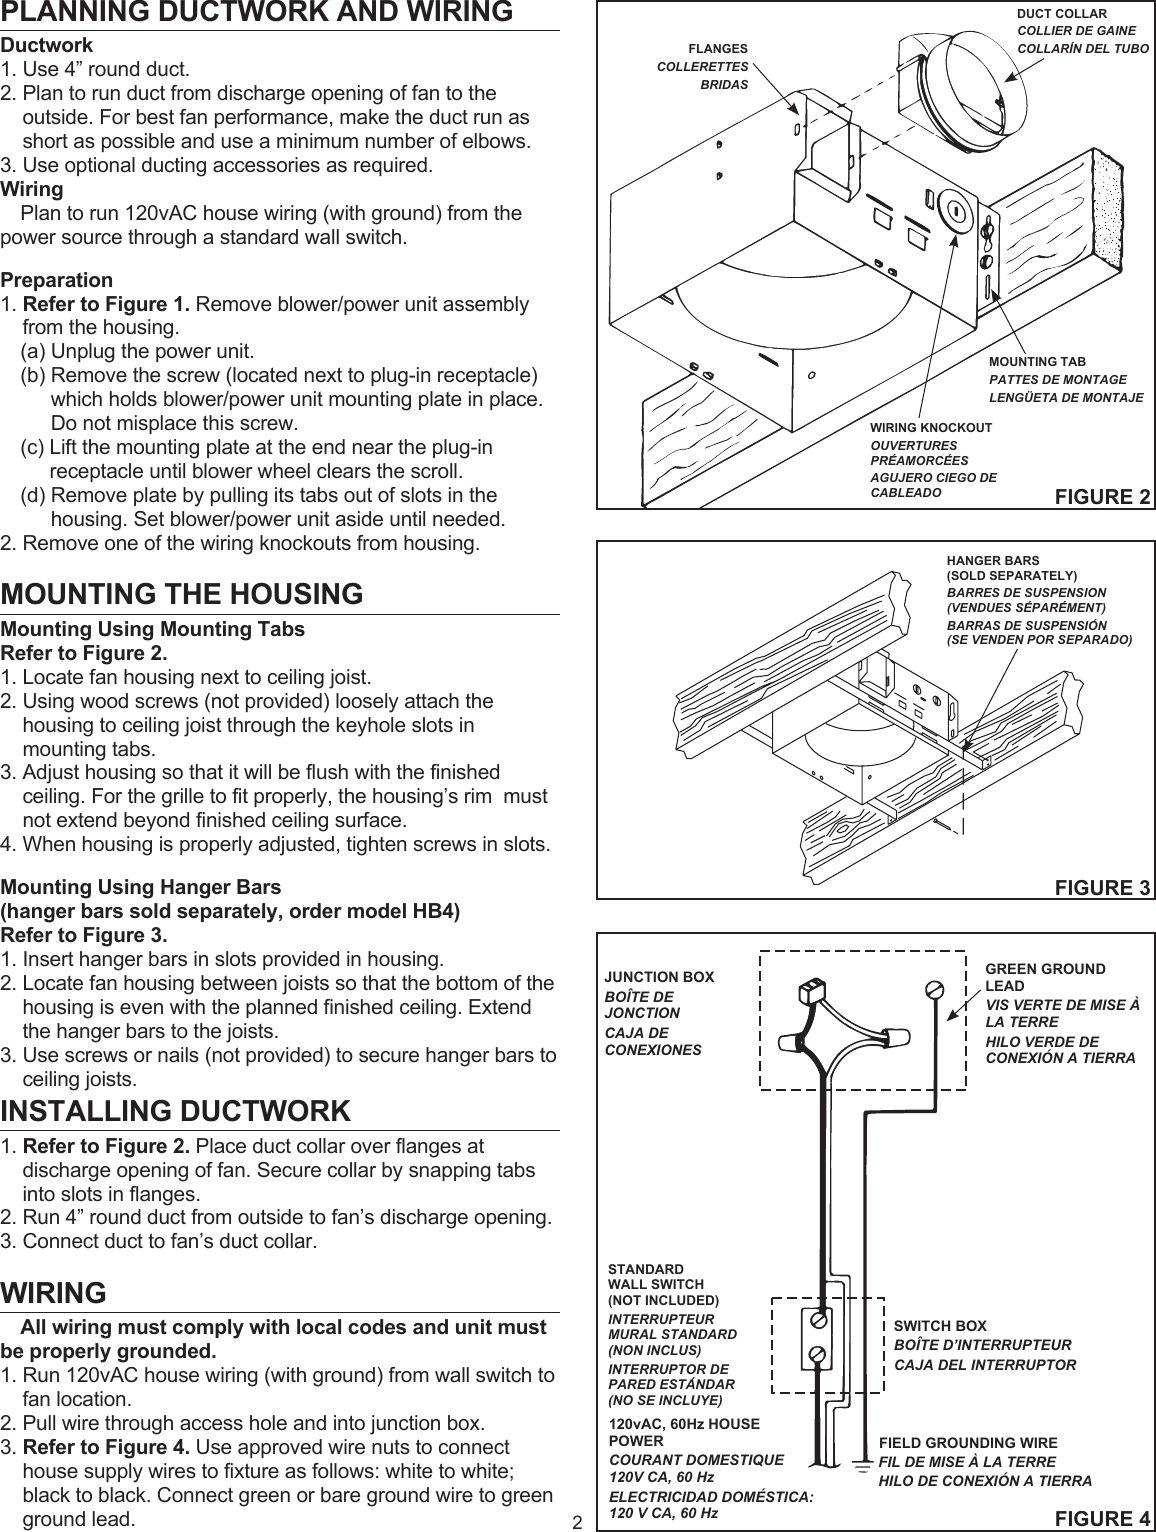 Page 2 of 6 - Broan 671 User Manual  To The Ea1ee905-99fb-4ede-8f43-1e7908010c00